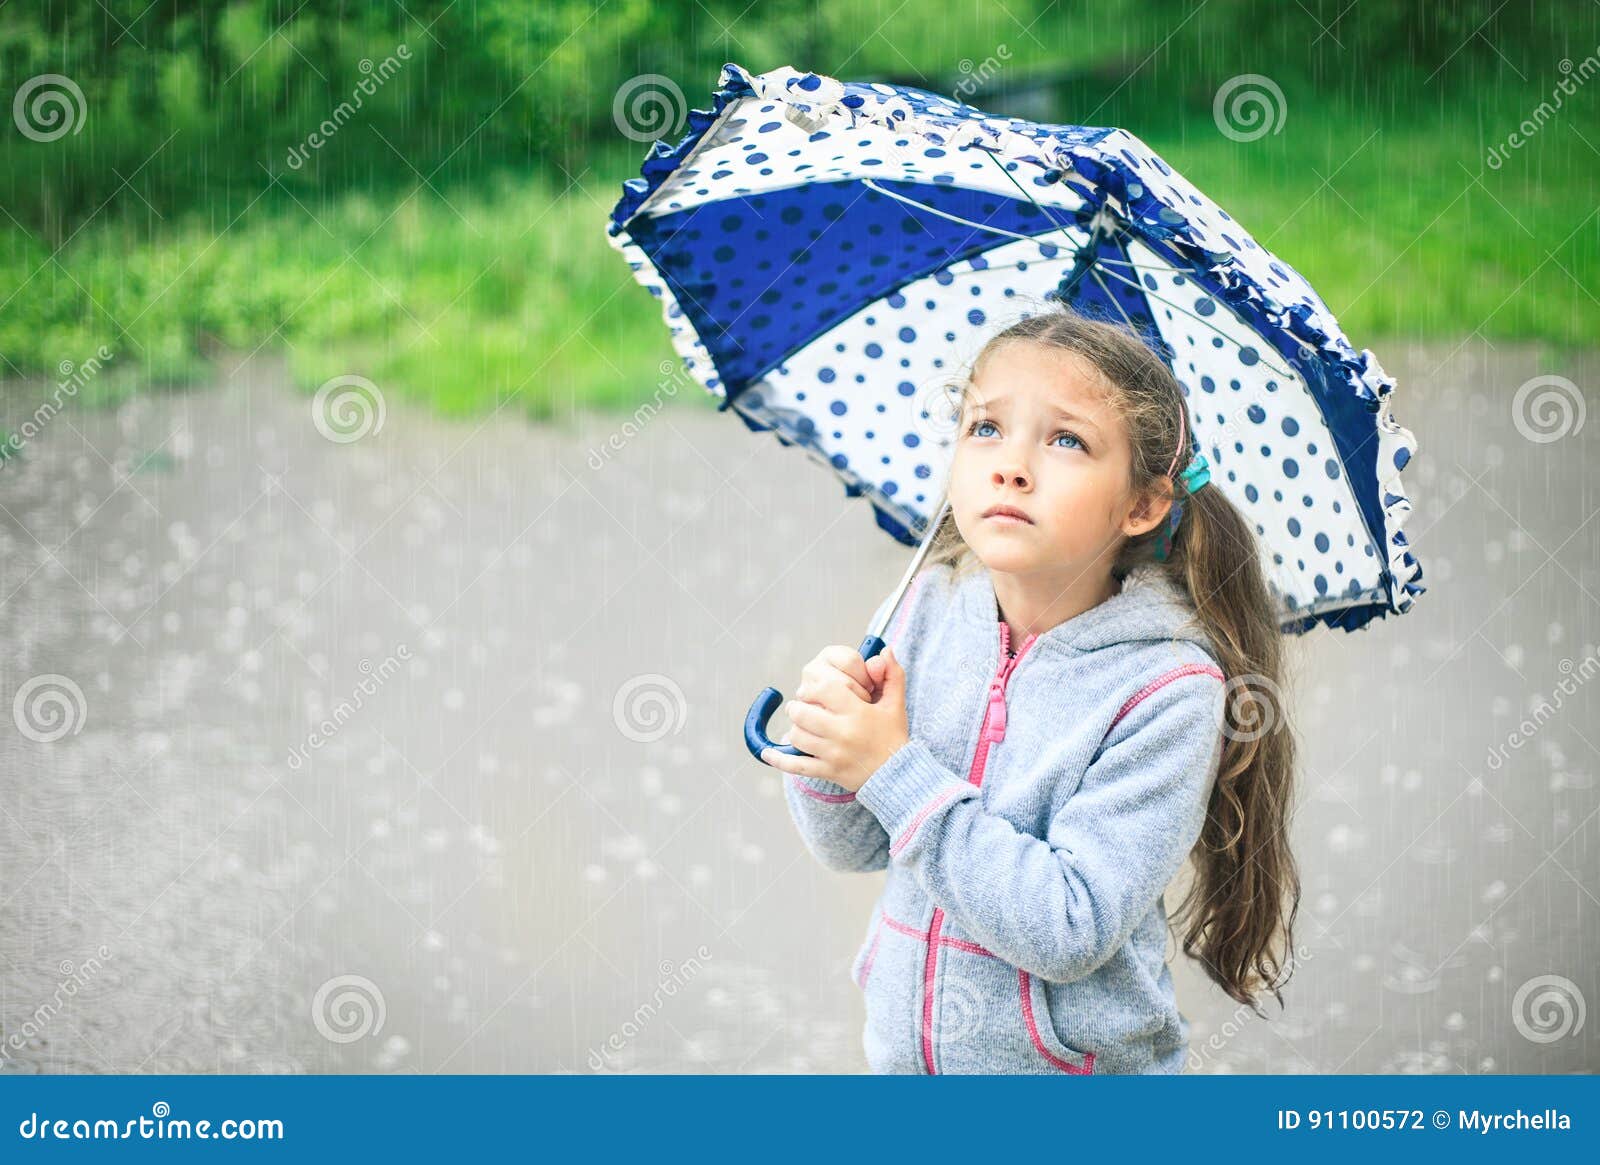 Portrait Of A Cute Sad Girl With An Umbrella Stock Photo